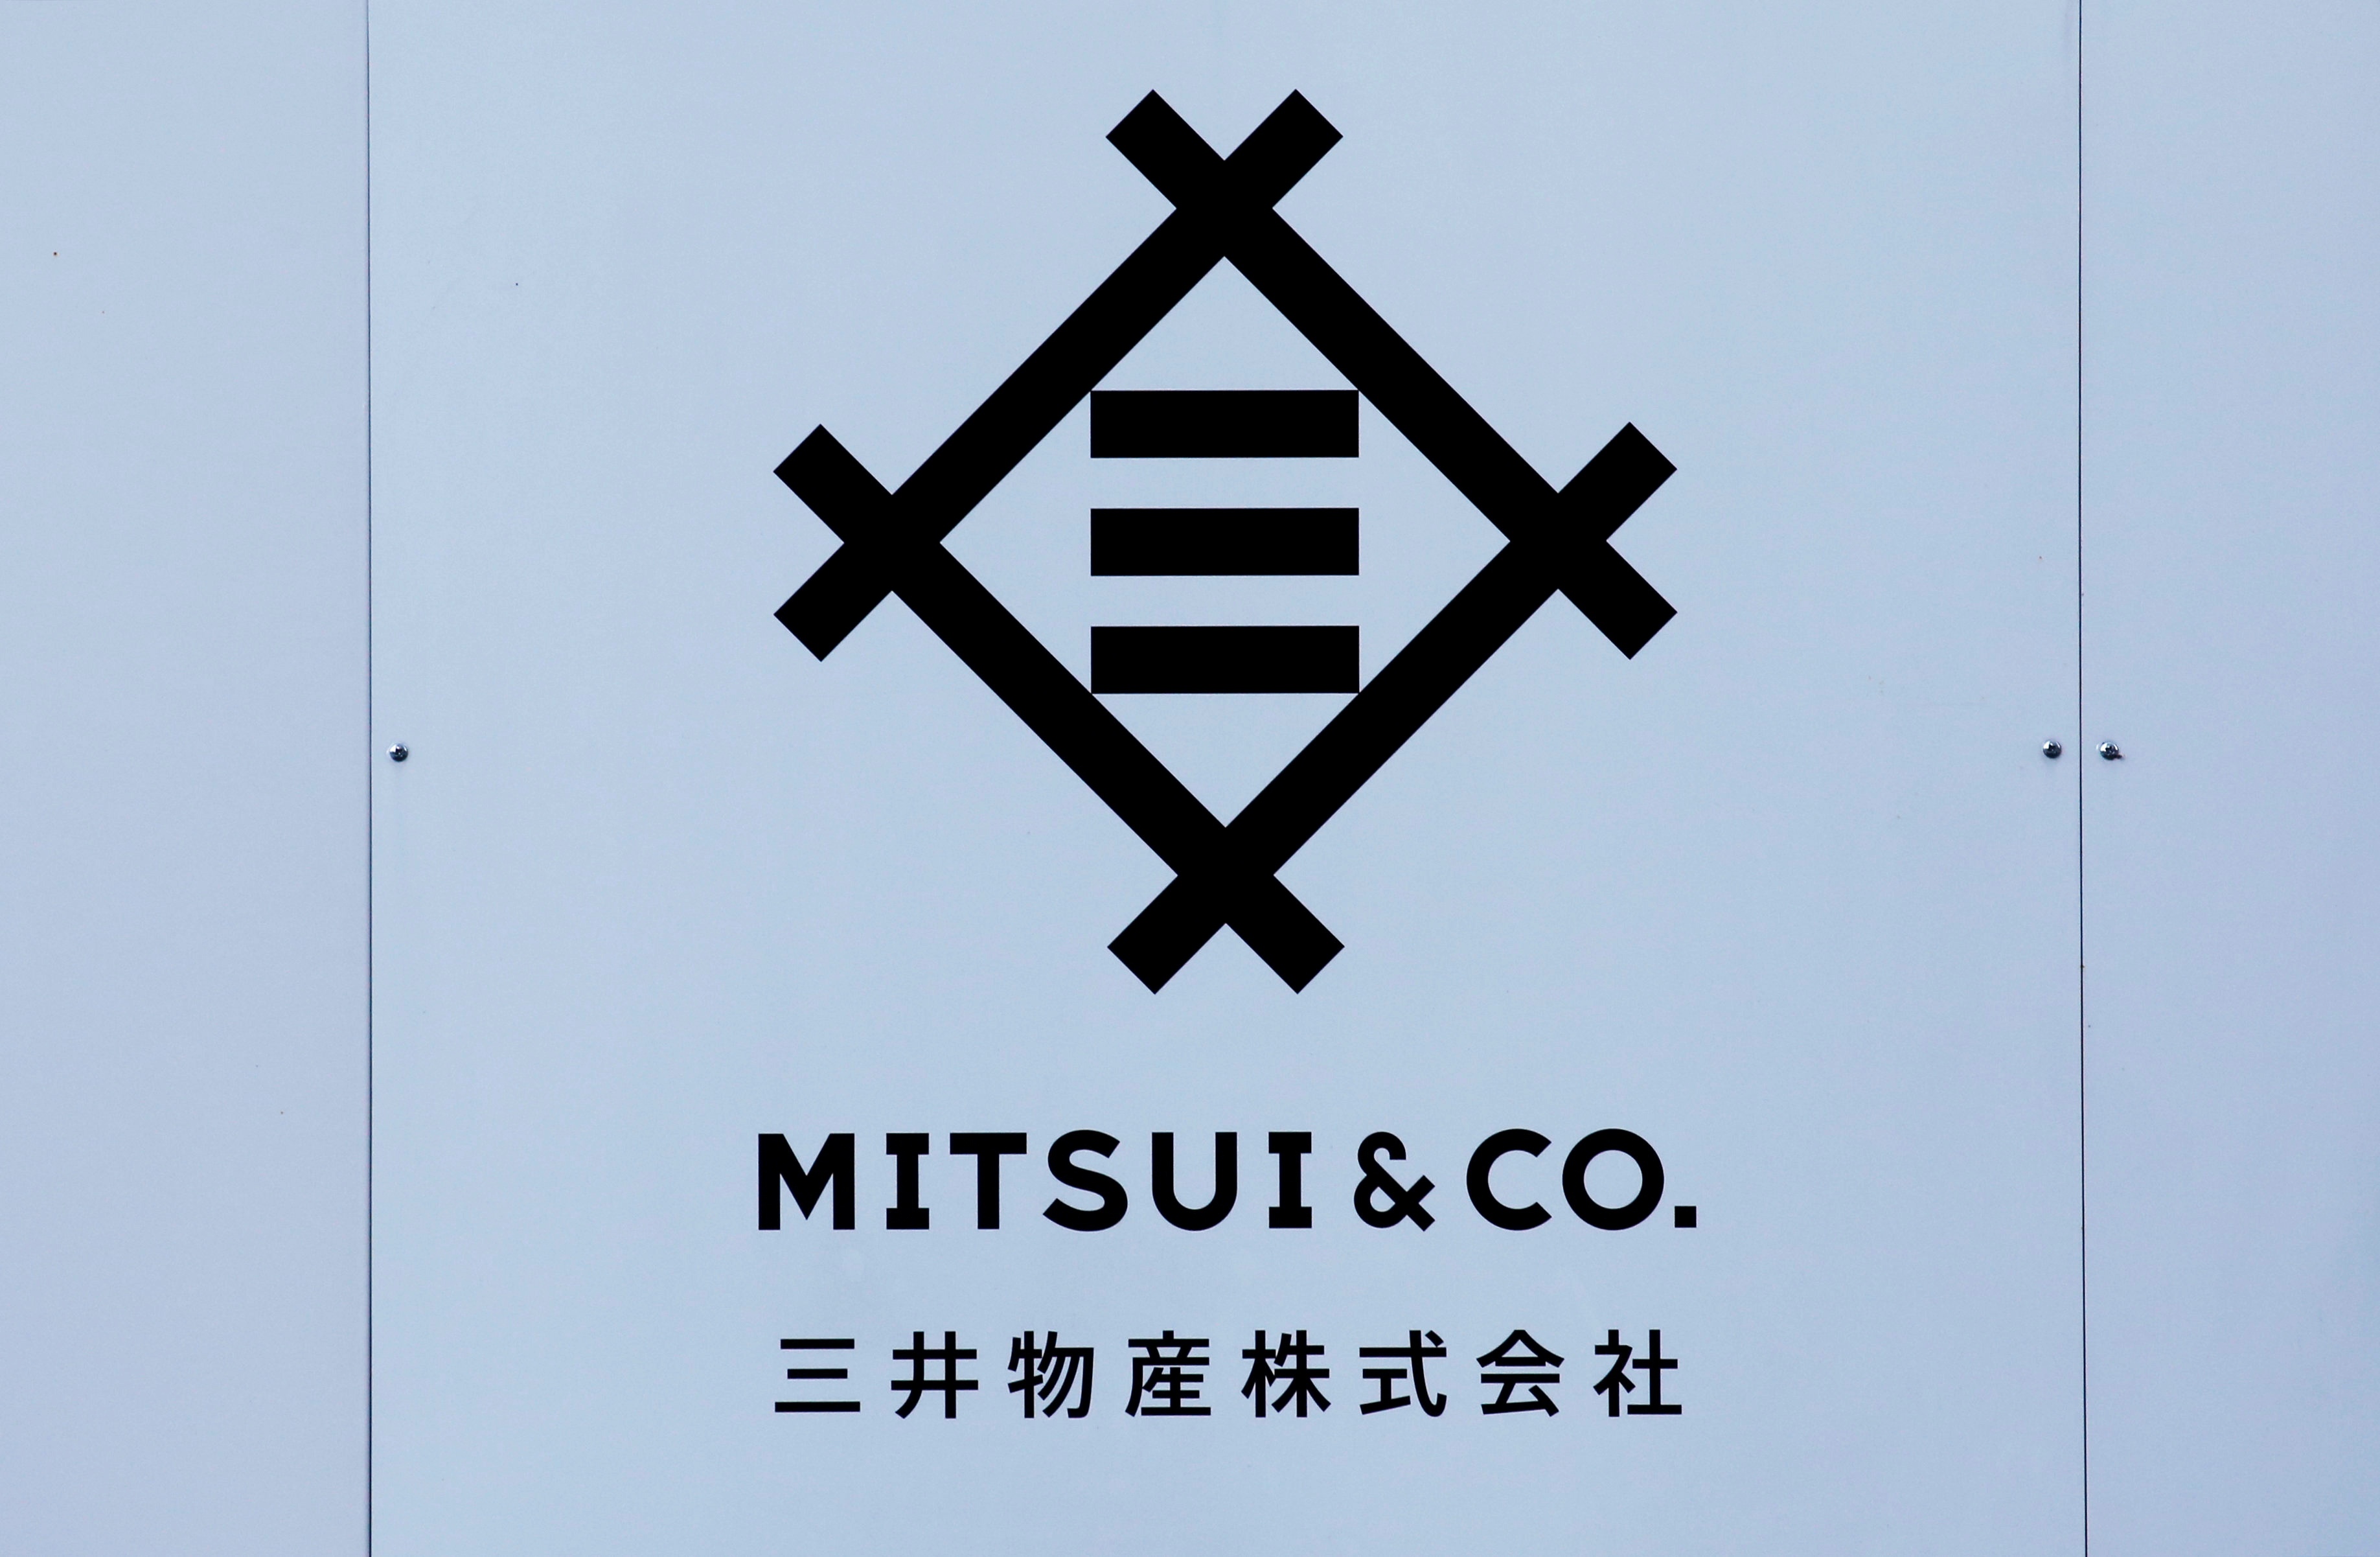 Logo of Japanese trading company Mitsui & Co. is seen in Tokyo